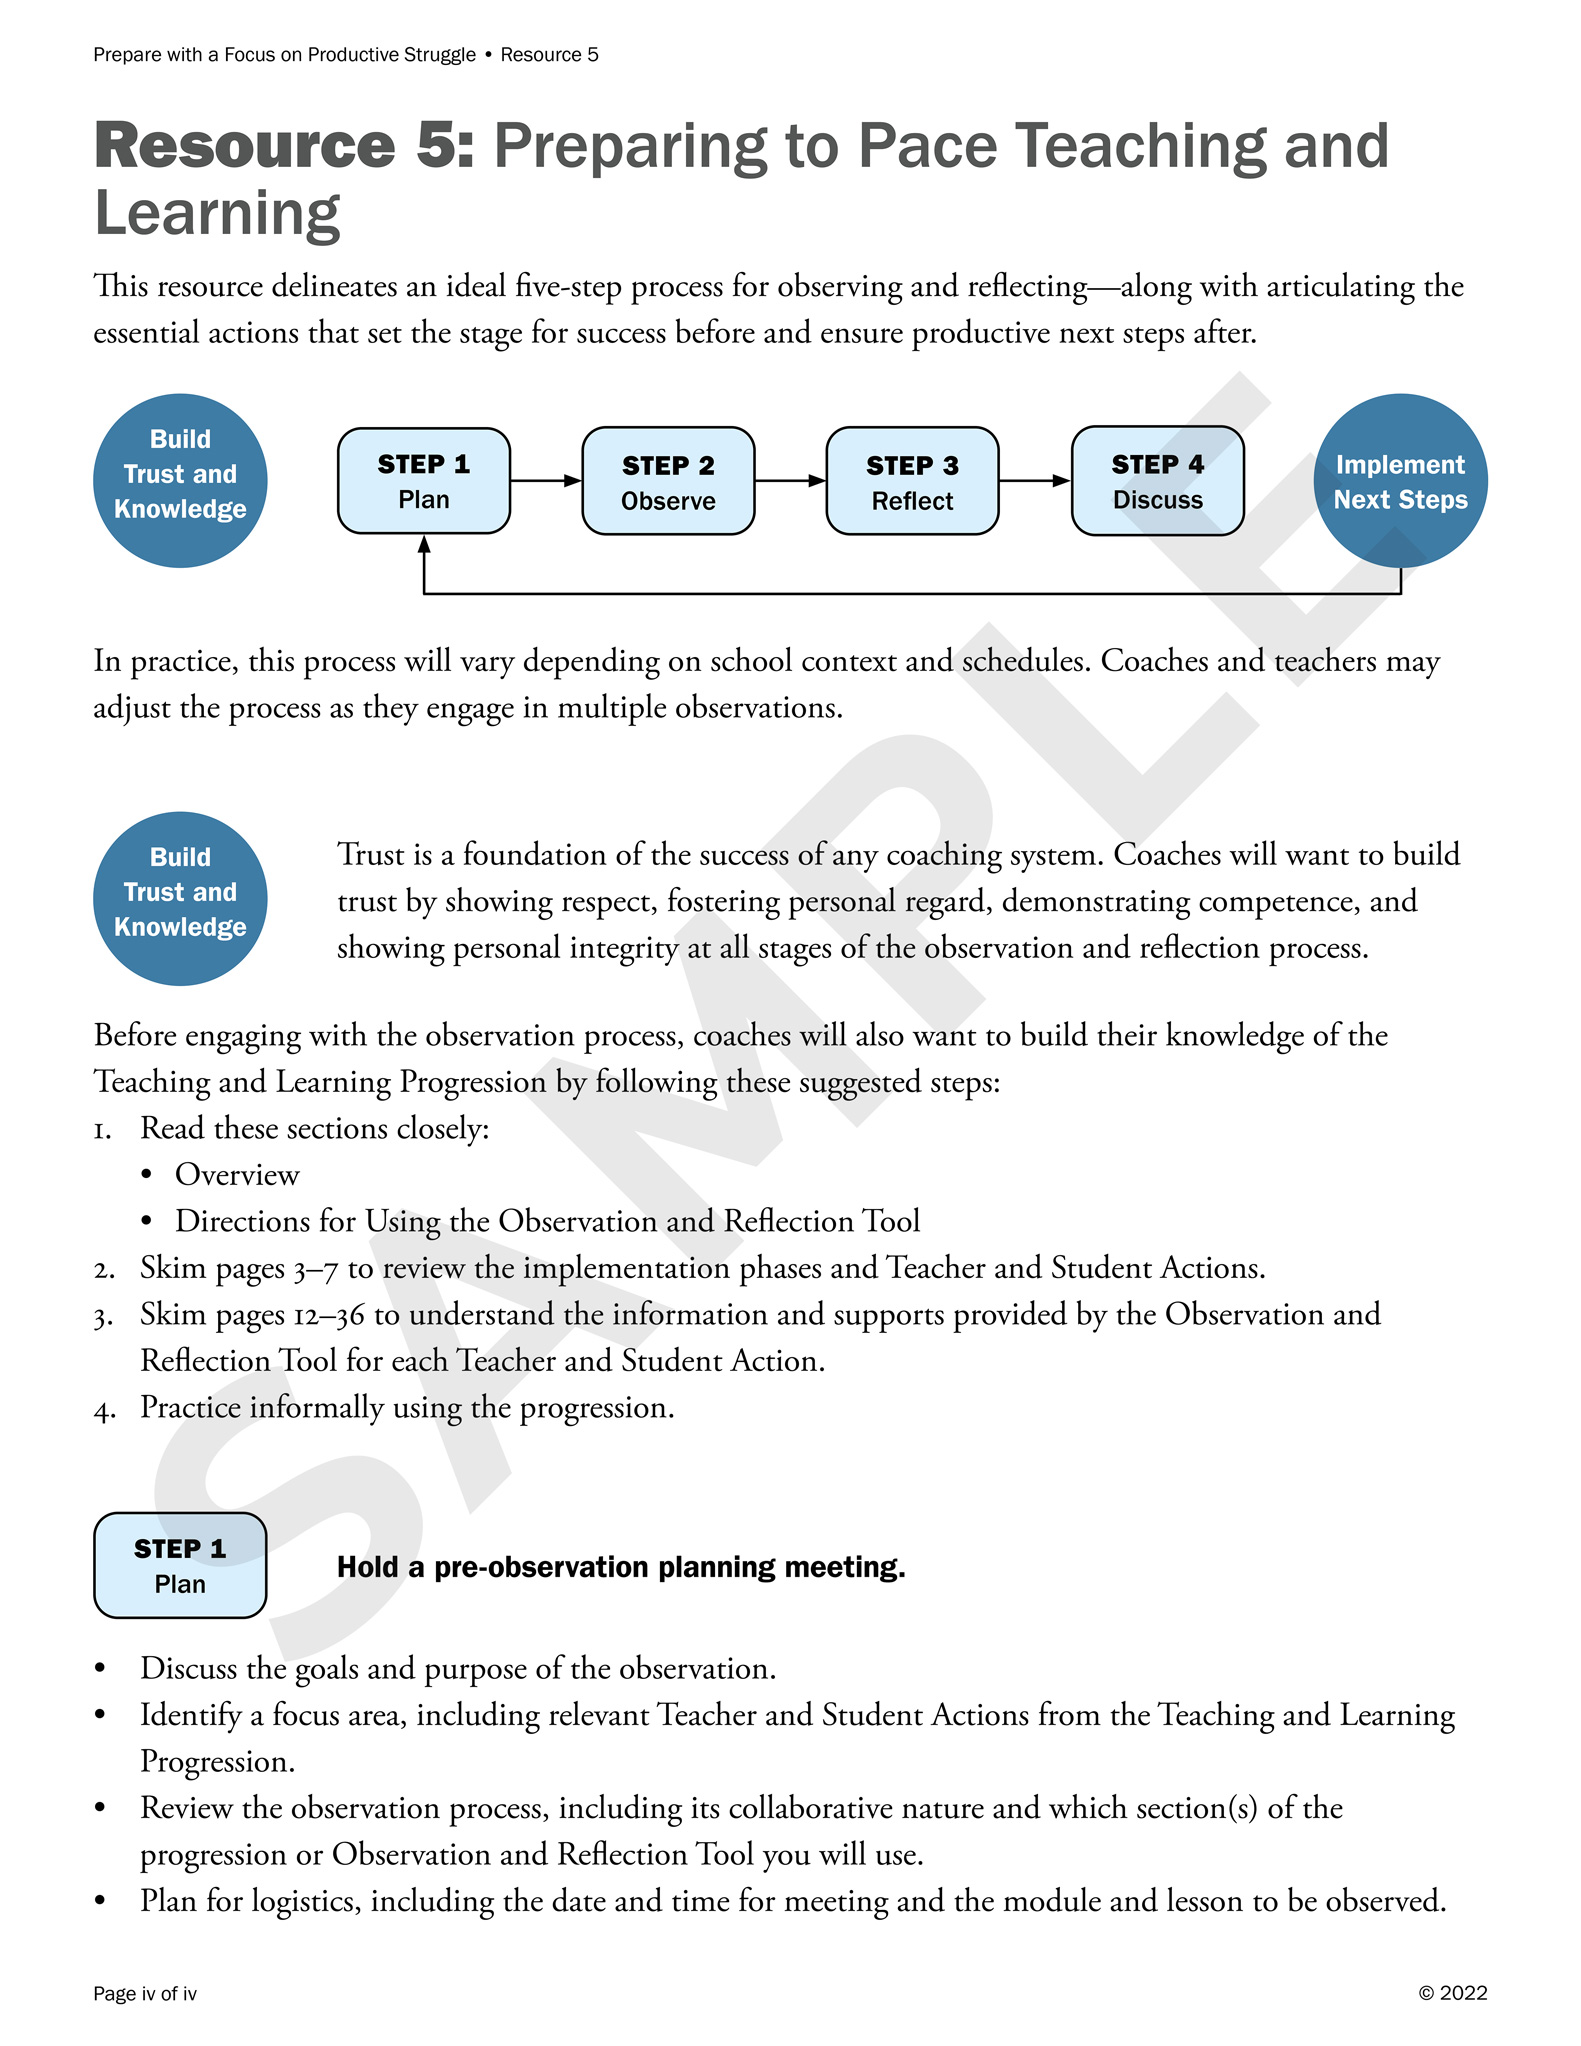 Page from a handout for a learning series for teachers. At the top, a flow chart shows the steps in the lesson observation process: build trust and knowledge, plan, observe, reflect, discuss, and implement next steps. Descriptive text follows.